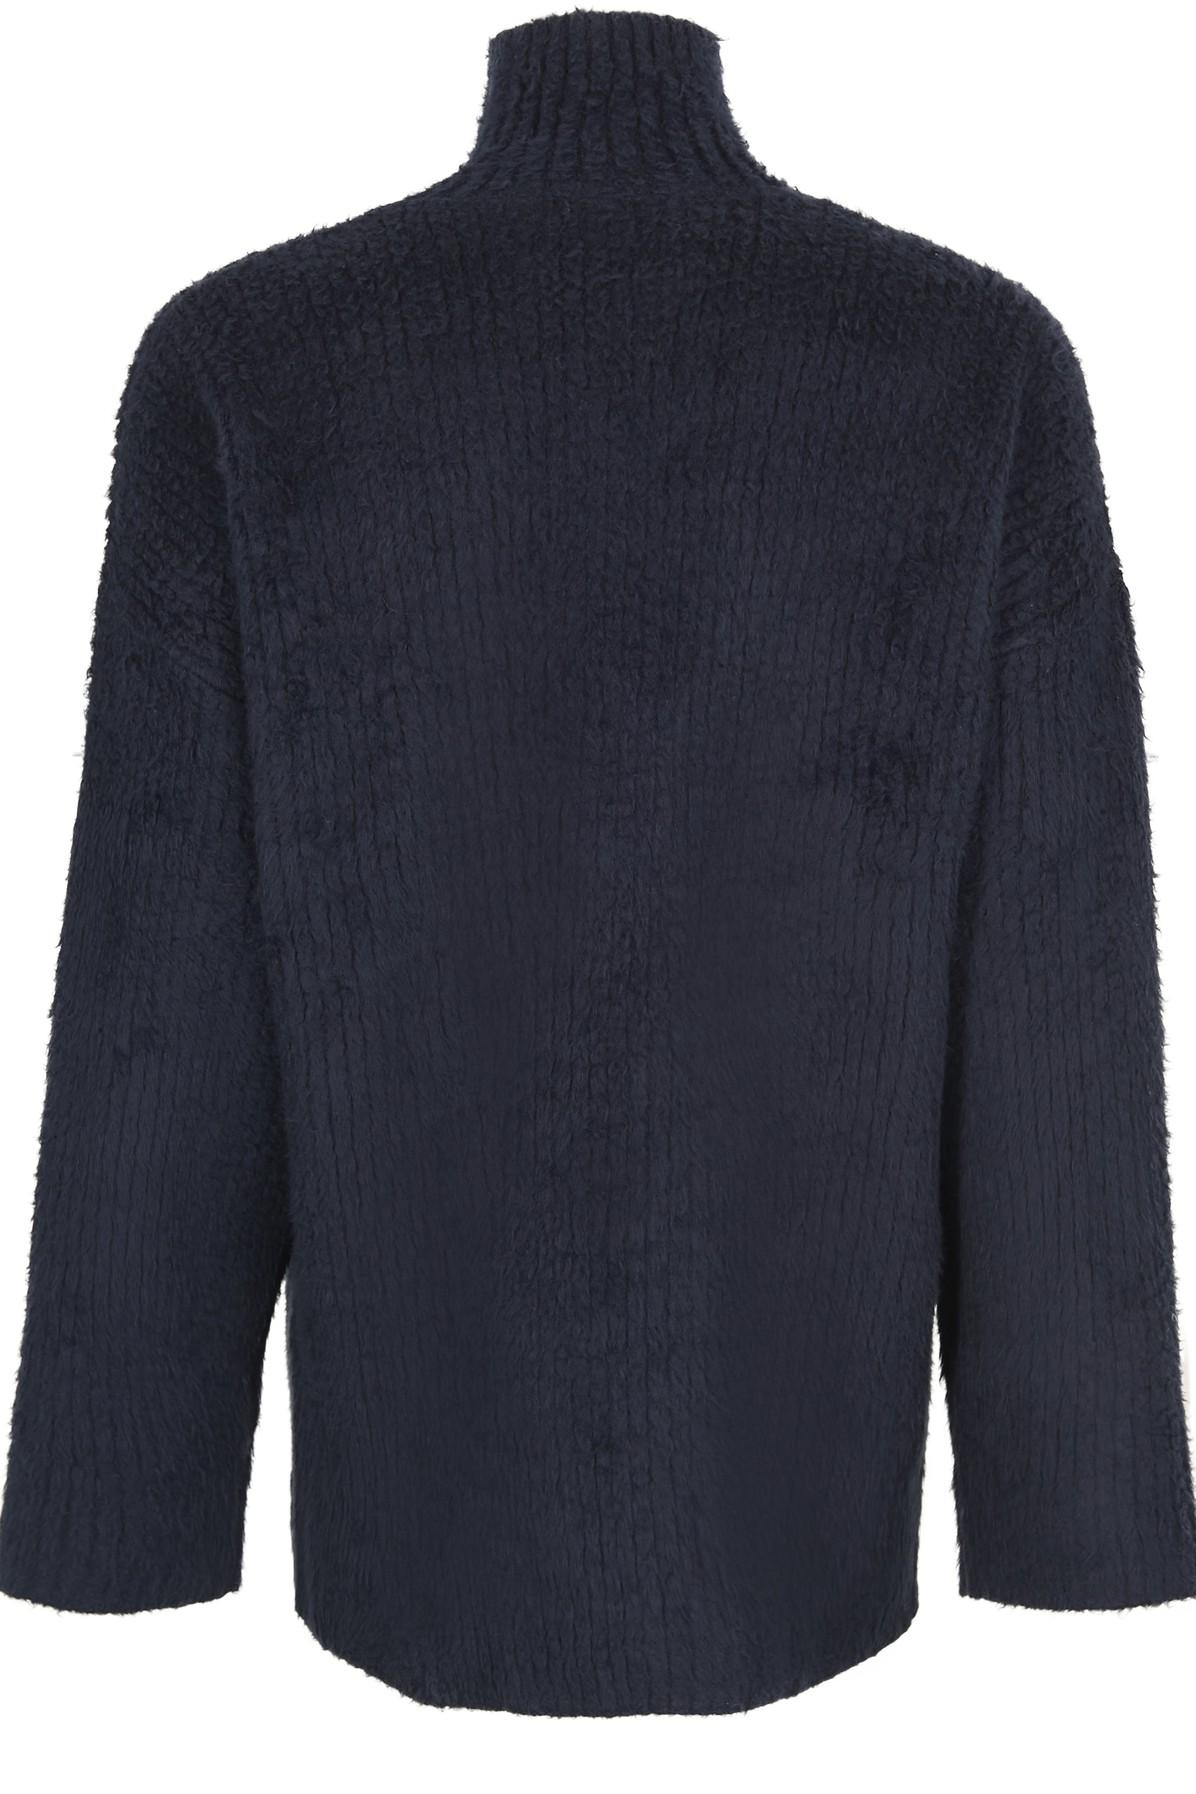 Brushed Cotton Scribble Knit in Navy (Blue) for Men - Lyst